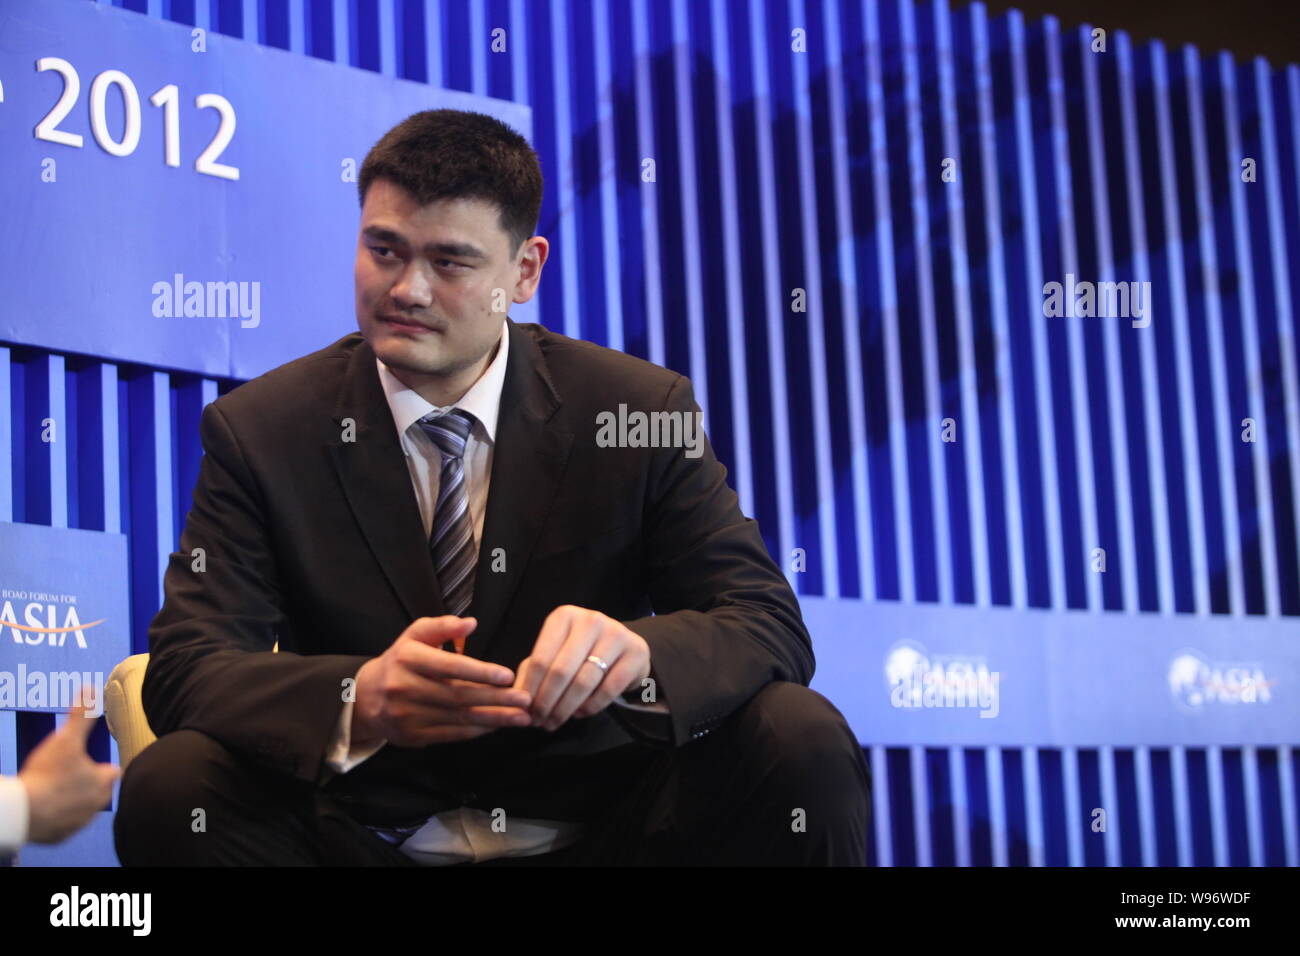 Retired Chinese basketball player Yao Ming is pictured during the BFA Annual Conference 2012 in Boao, south Chinas Hainan Province, 1 April 2012.   Fo Stock Photo